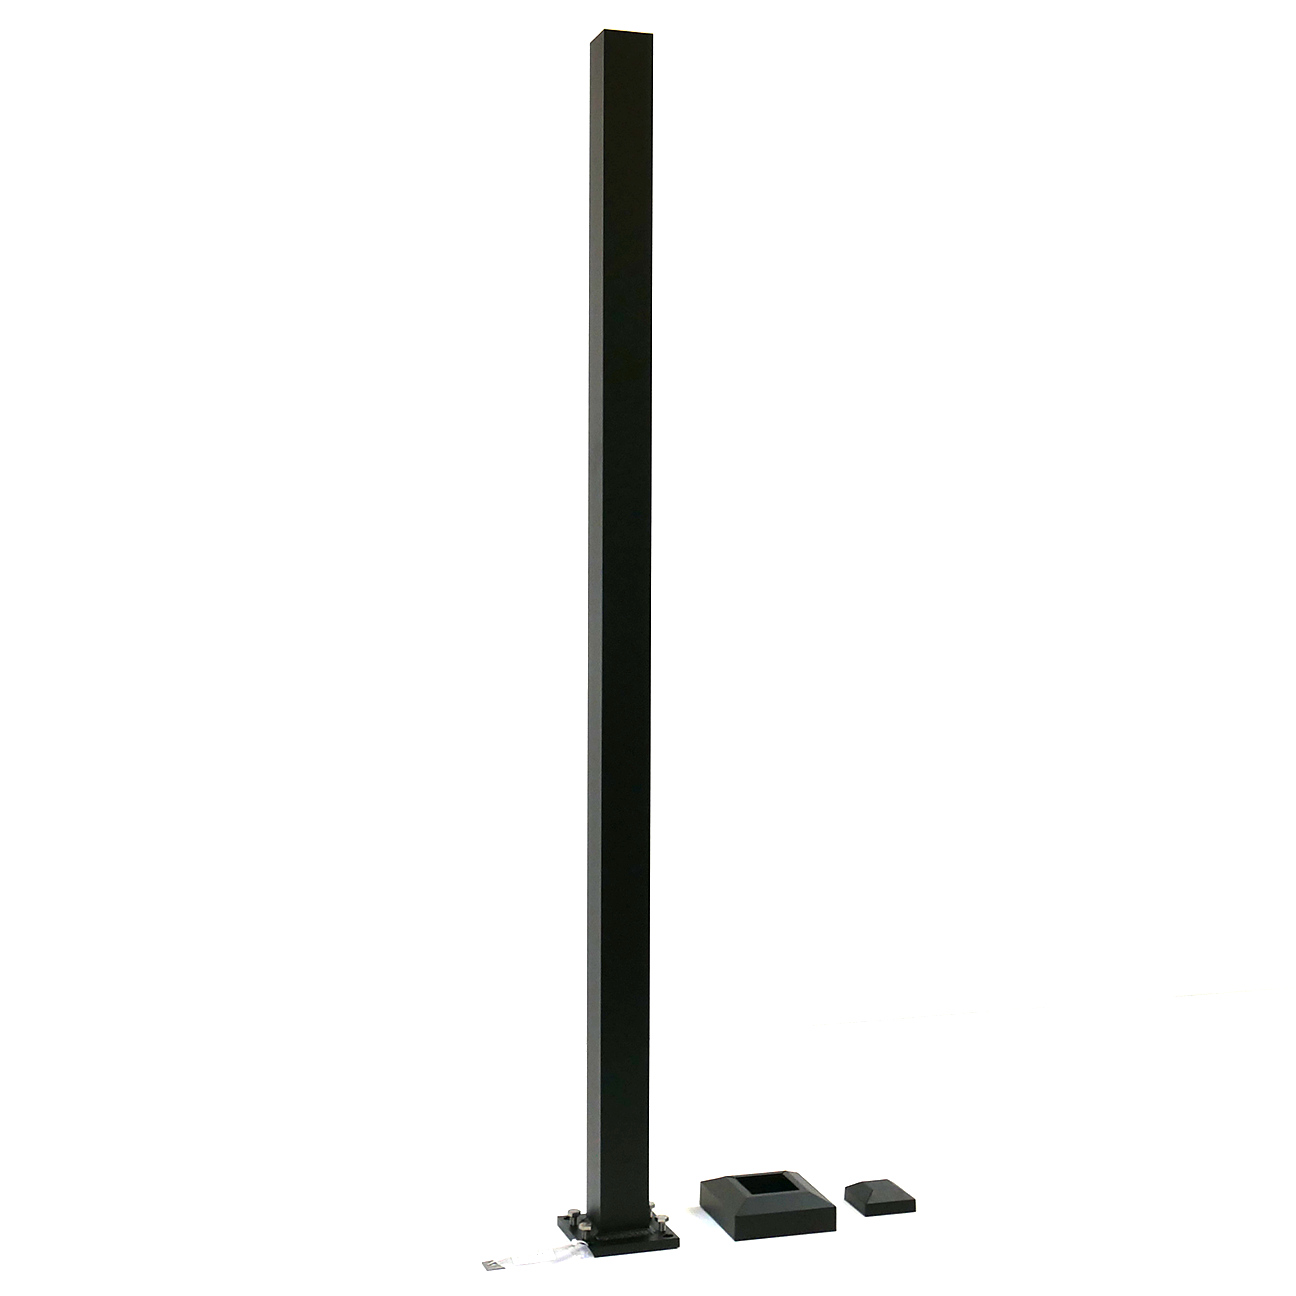 Product photo of Westbury 2" x 2" x 47" Textured Black aluminum handrail post. Two inches by Fourty Seven Inches.